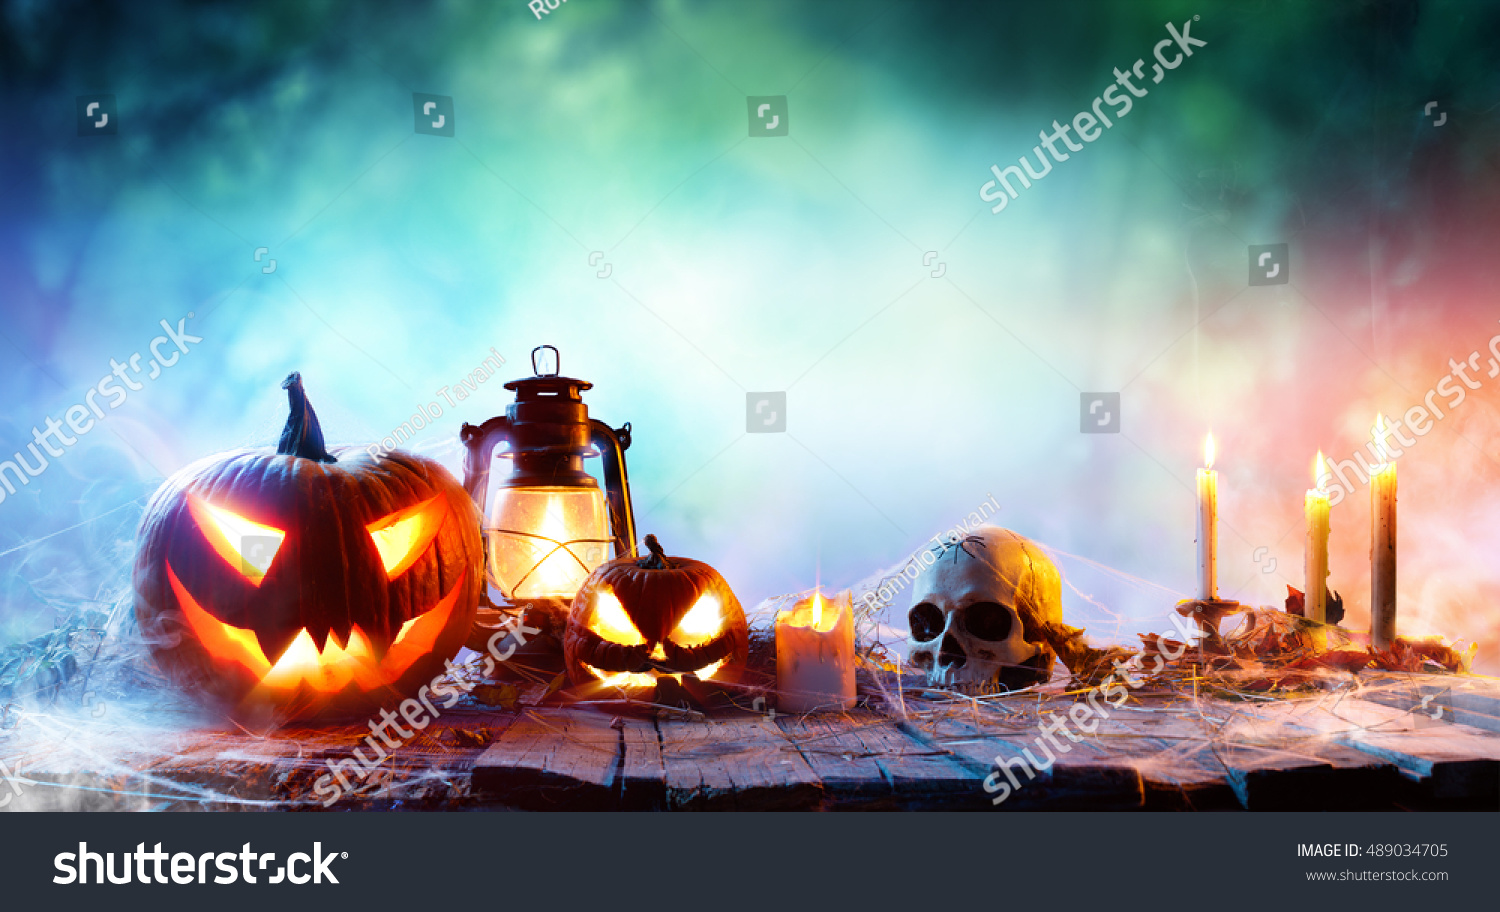 Halloween - Lanterns And Pumpkins On Wooden Table In A Haunted Forest
 #489034705